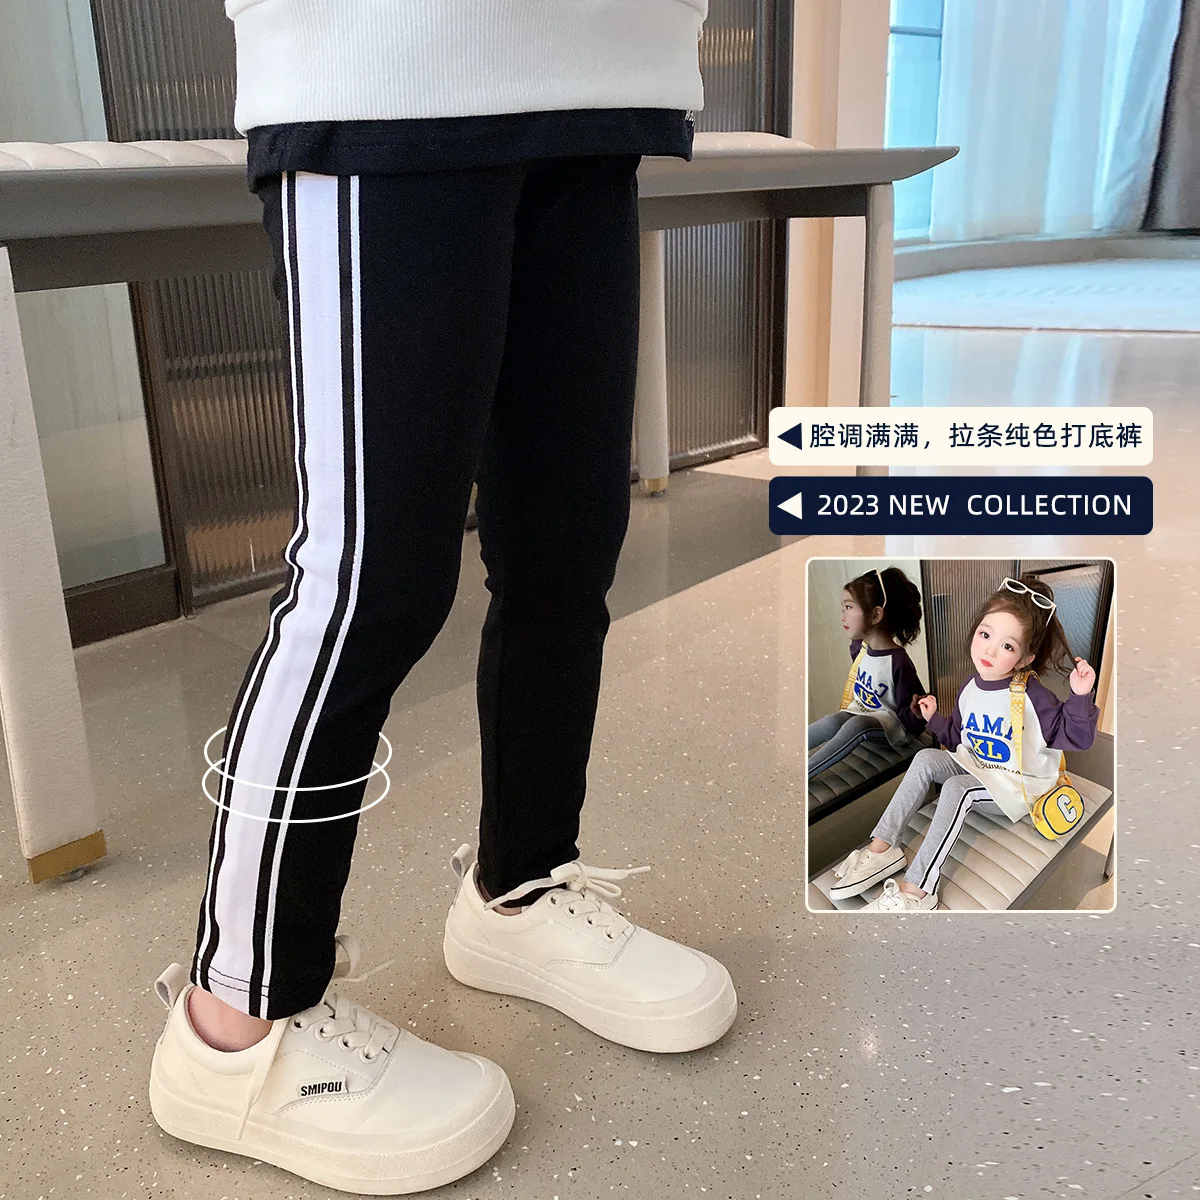 

New 2023 Pants for Kids Autumn Trousers Enfant Garcon Kids Fashion Loose Letter Gray Black Baby Girls Overalls Pants 18M-7T